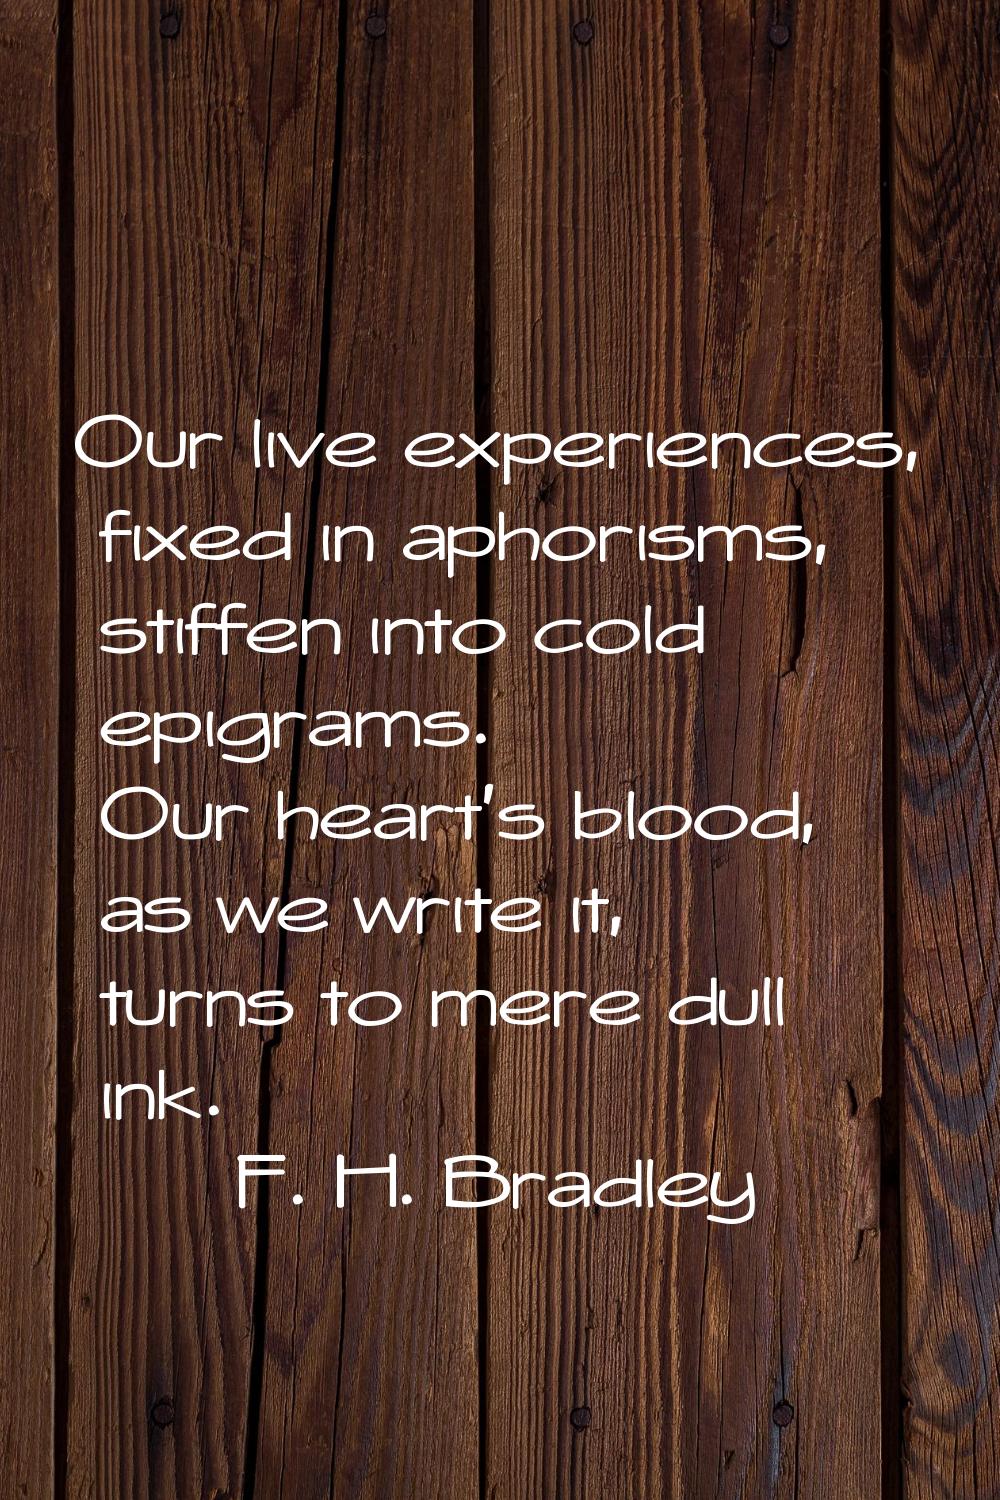 Our live experiences, fixed in aphorisms, stiffen into cold epigrams. Our heart's blood, as we writ